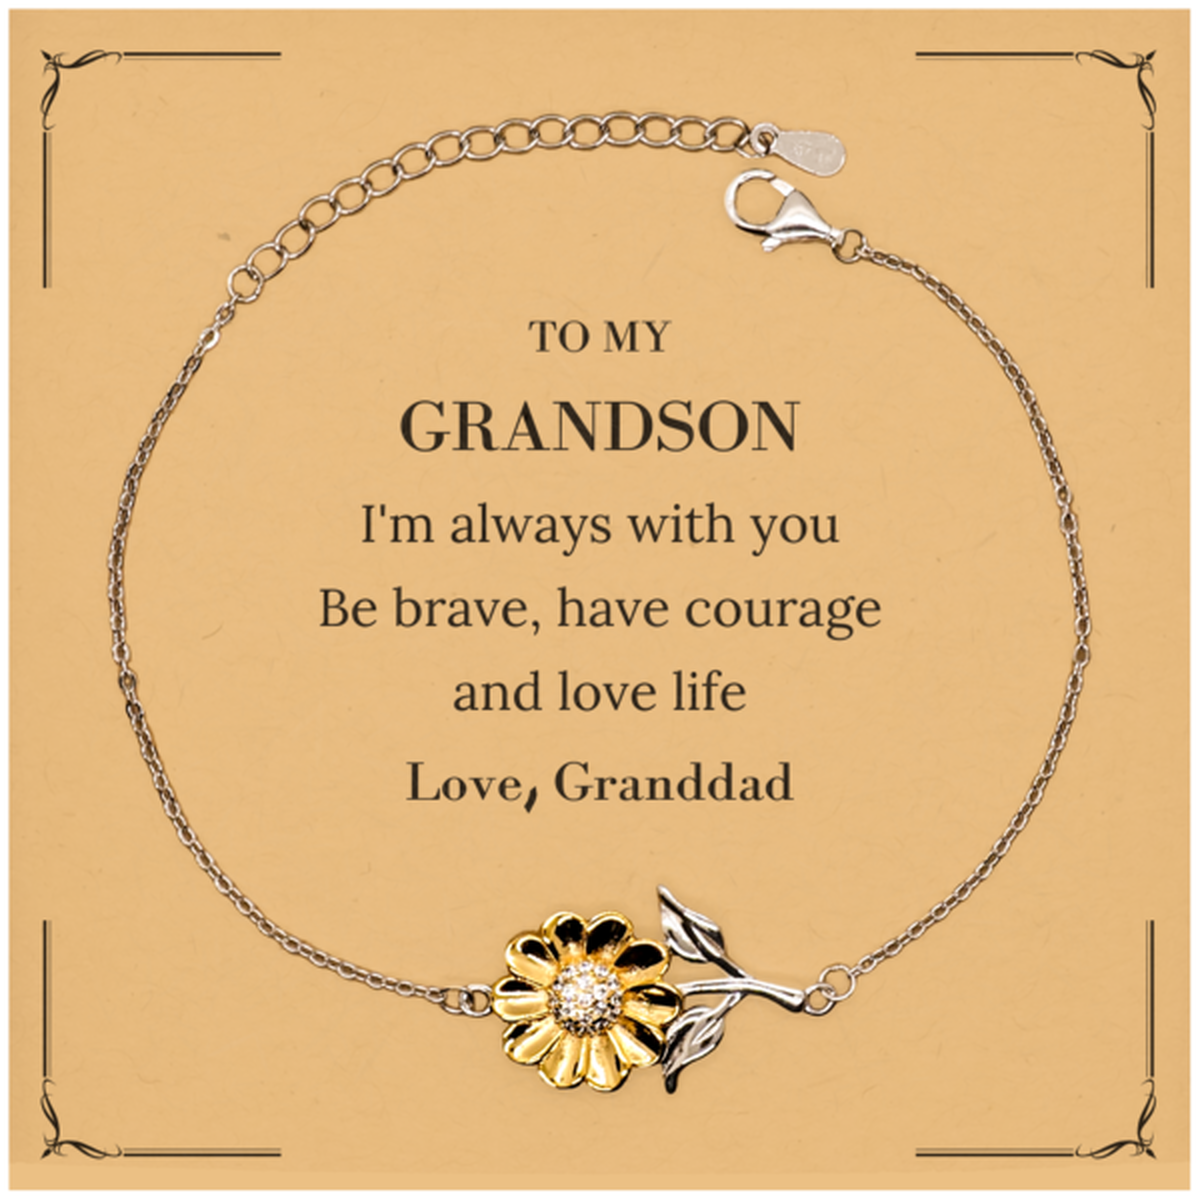 To My Grandson Gifts from Granddad, Unique Sunflower Bracelet Inspirational Christmas Birthday Graduation Gifts for Grandson I'm always with you. Be brave, have courage and love life. Love, Granddad